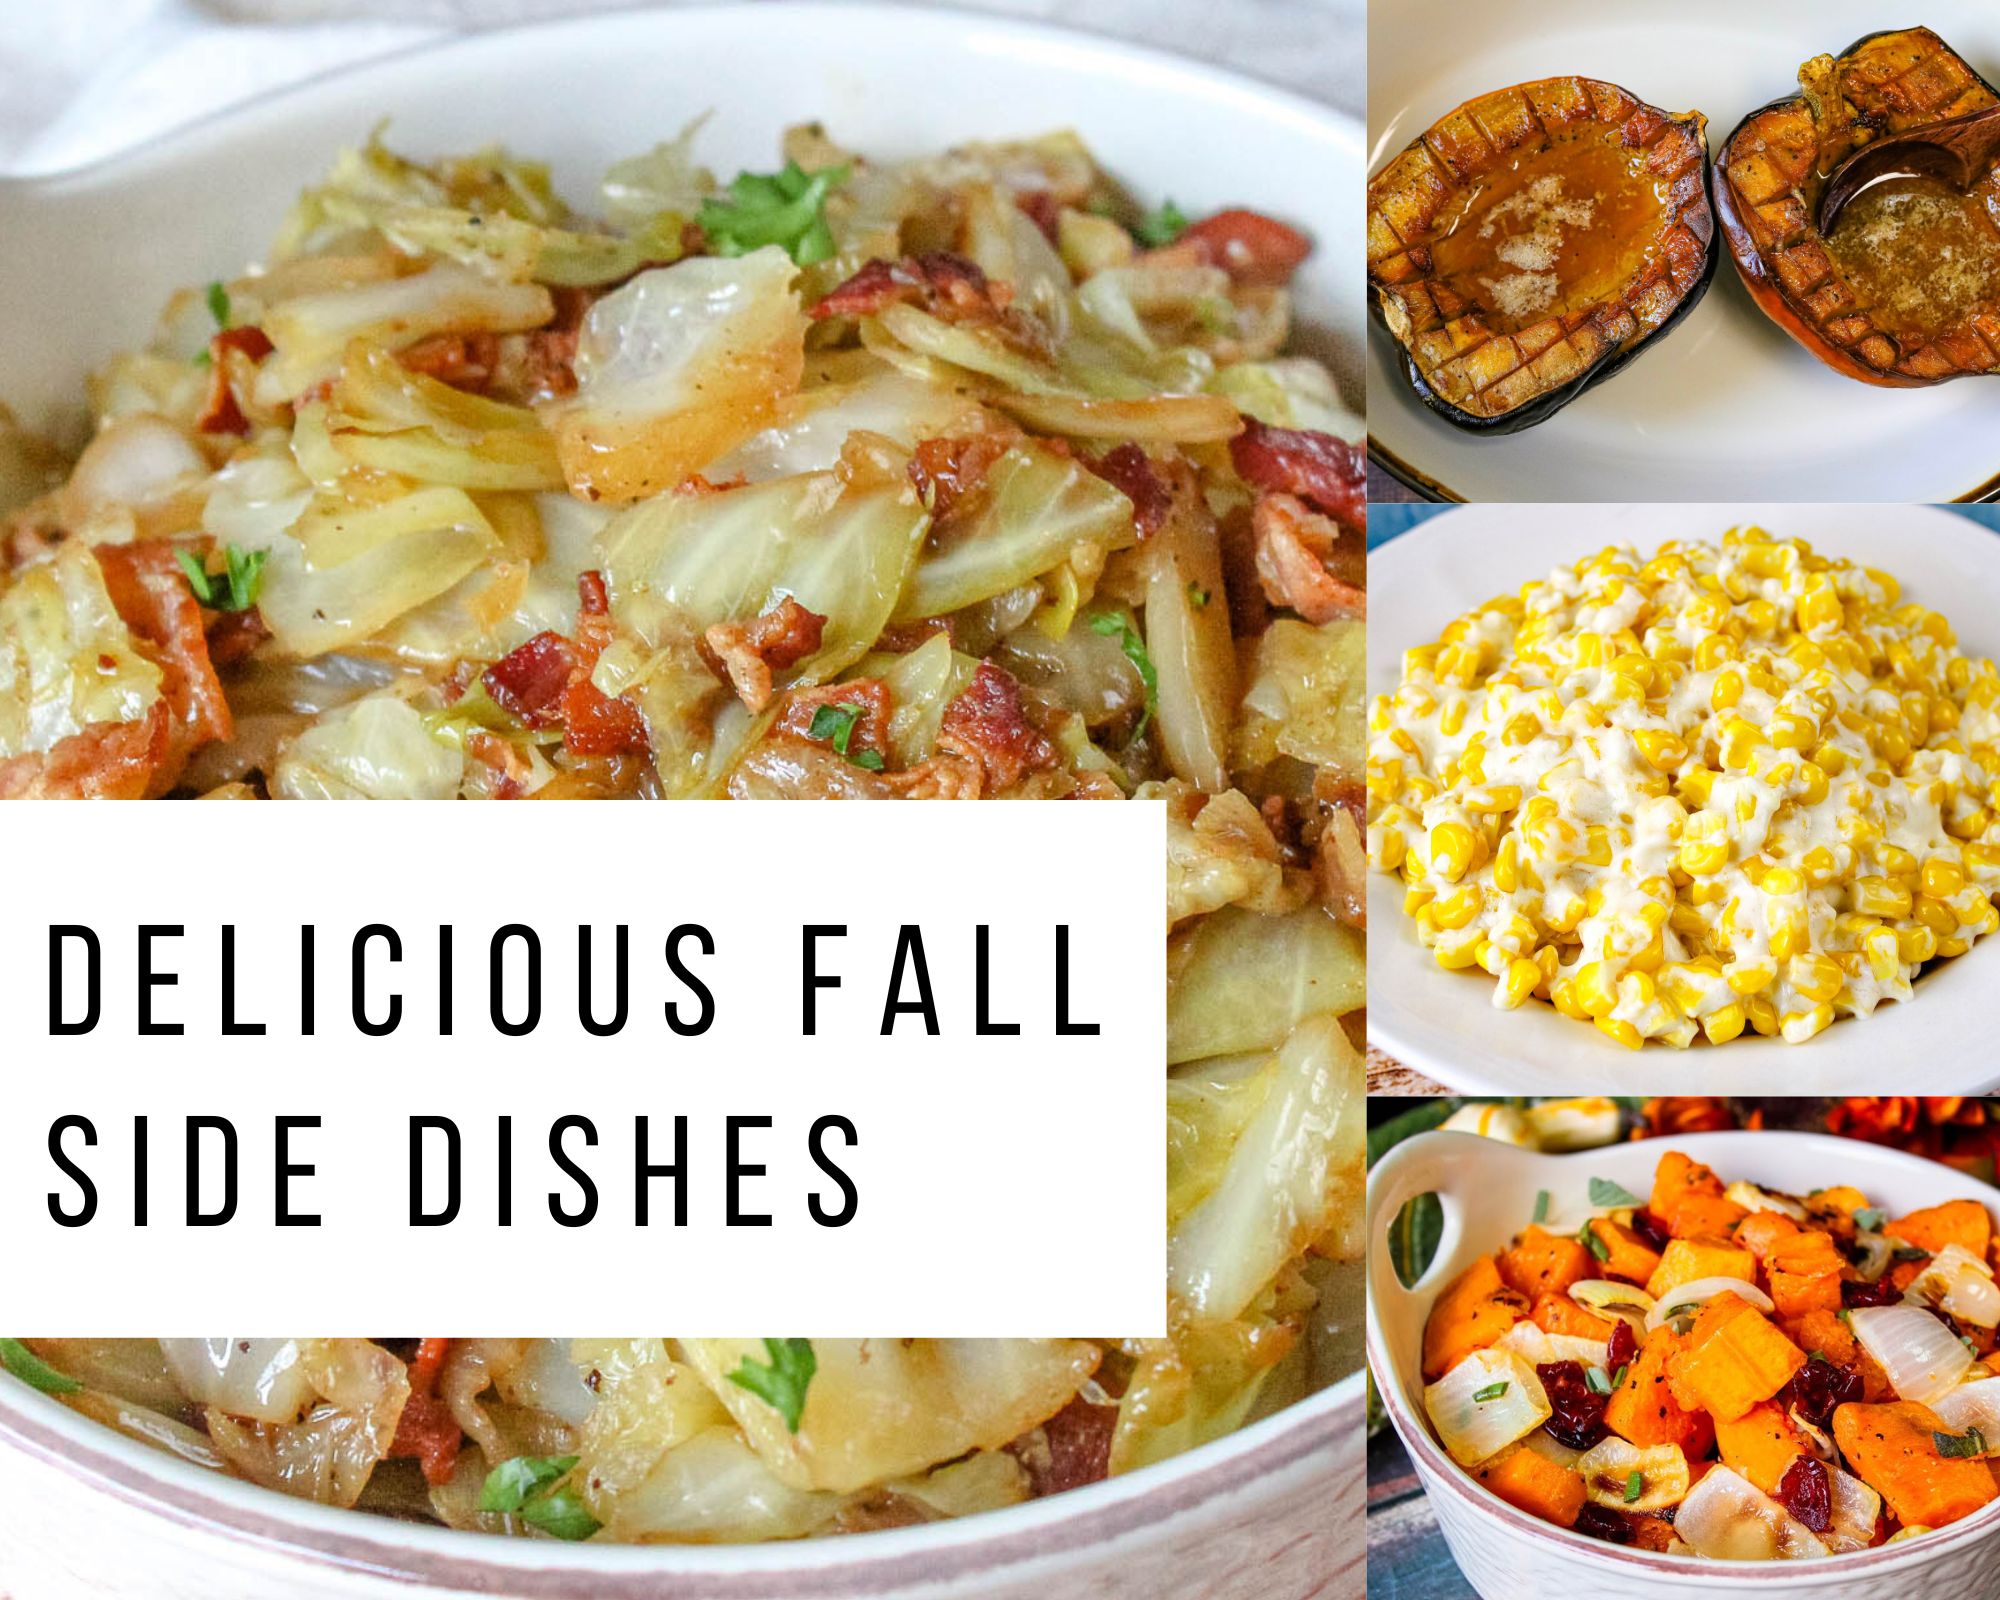 Delicious Fall Side Dishes